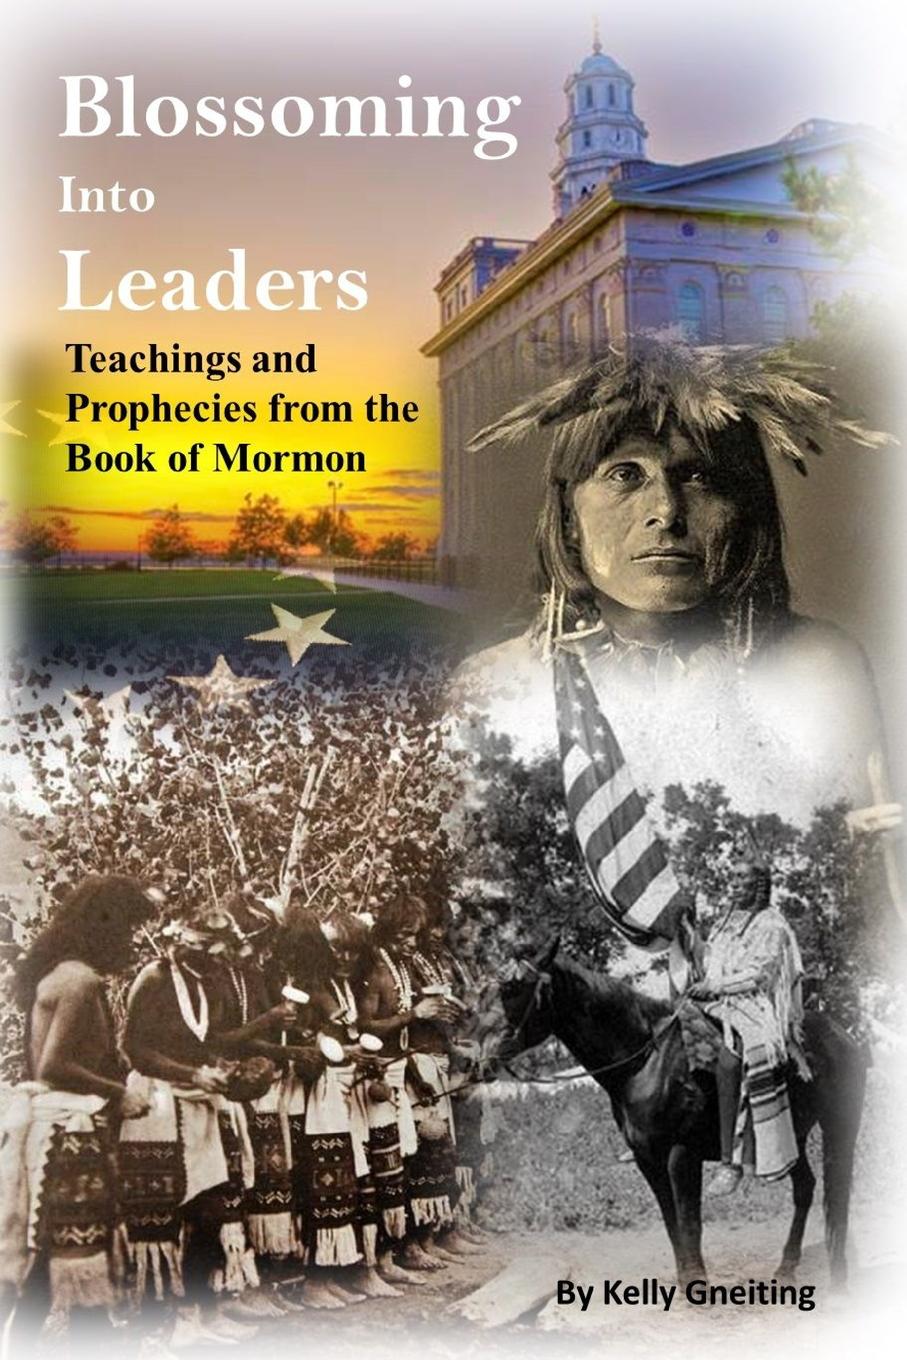 Blossoming into Leaders. Teachings and Prophecies from the Book of Mormon